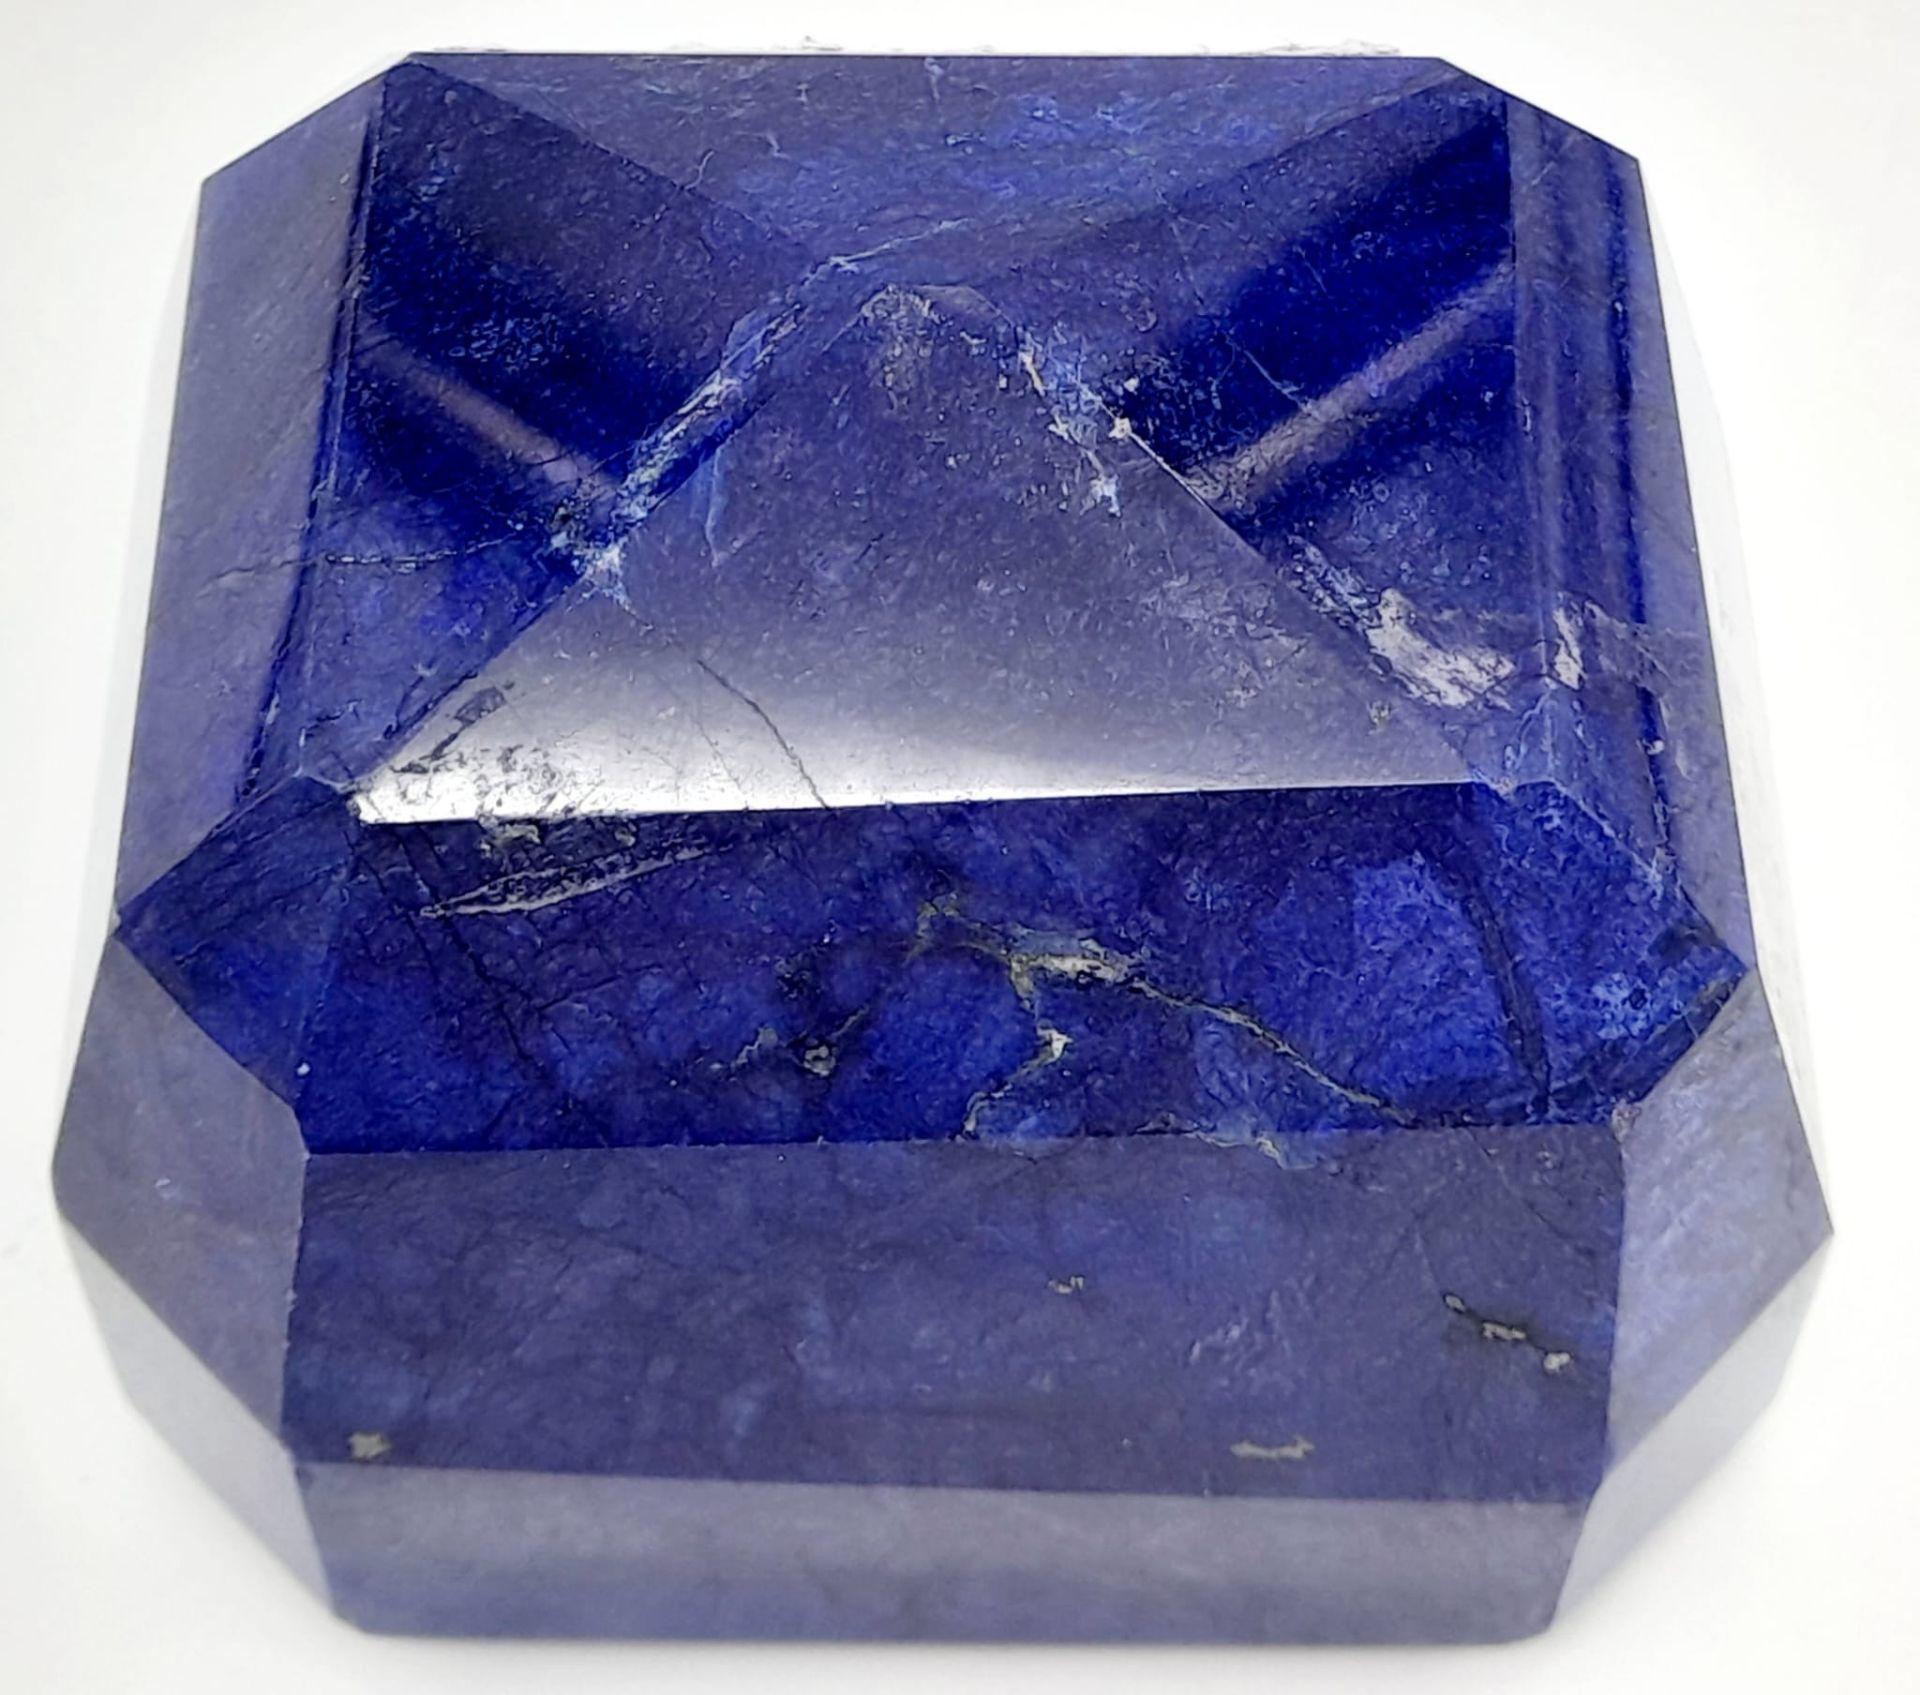 A 4230ct Rare Natural Blue Sapphire, Octagonal Shape. Comes Complete with GLI Certificate. - Image 2 of 8